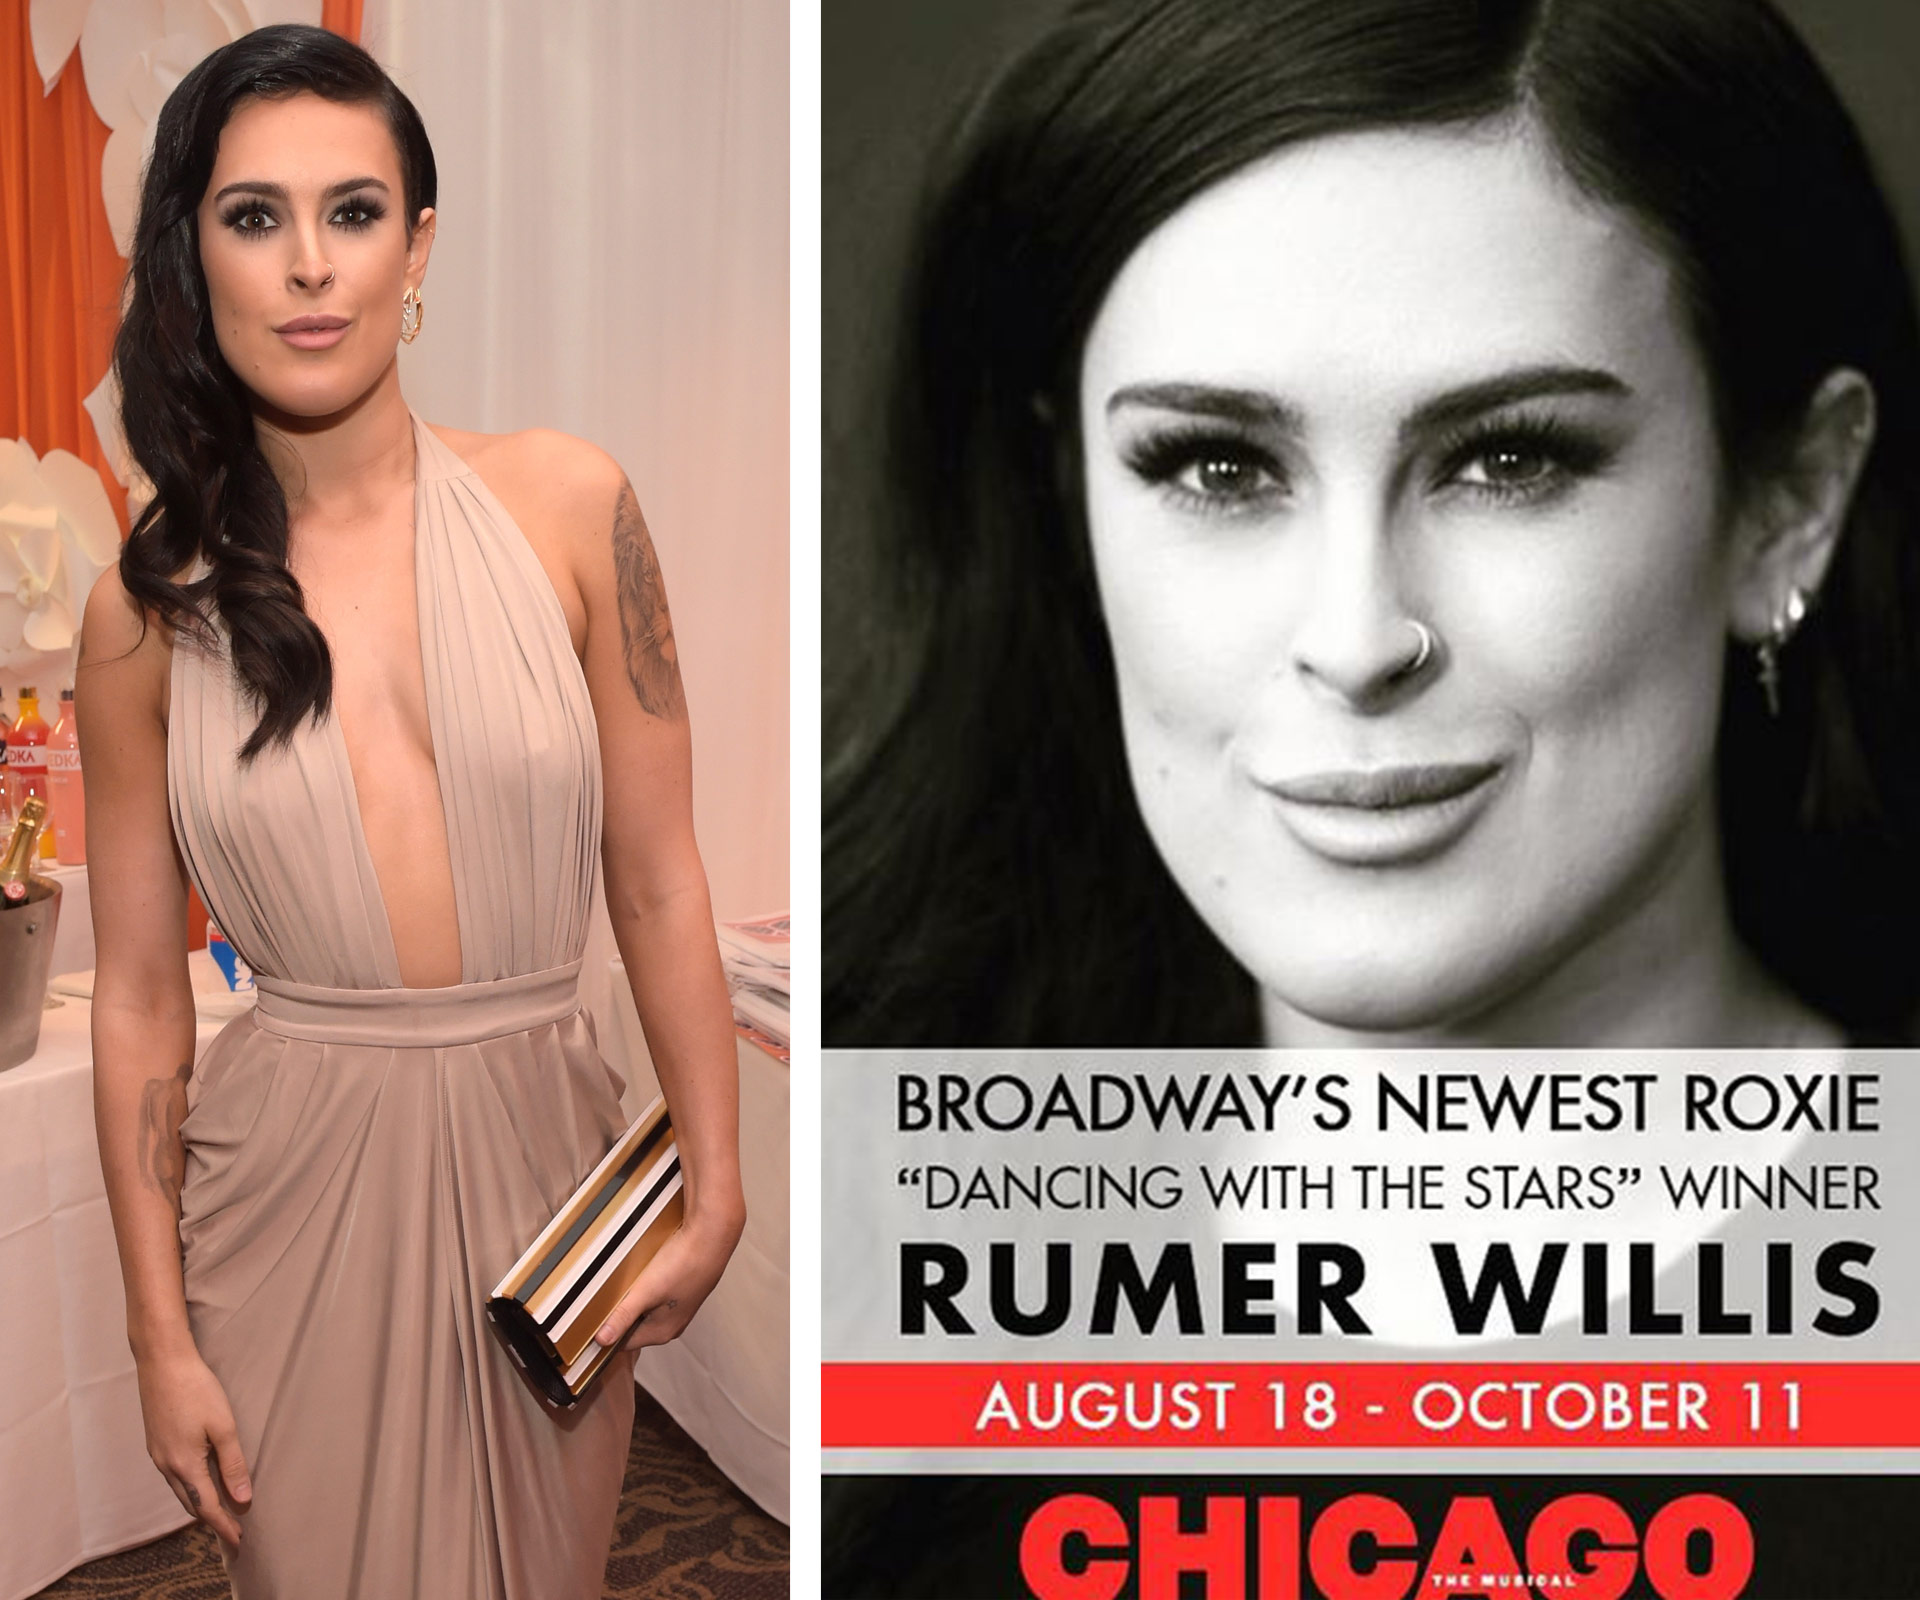 Rumer Willis is dancing her way onto Broadway to play Chicago’s Roxie Hart